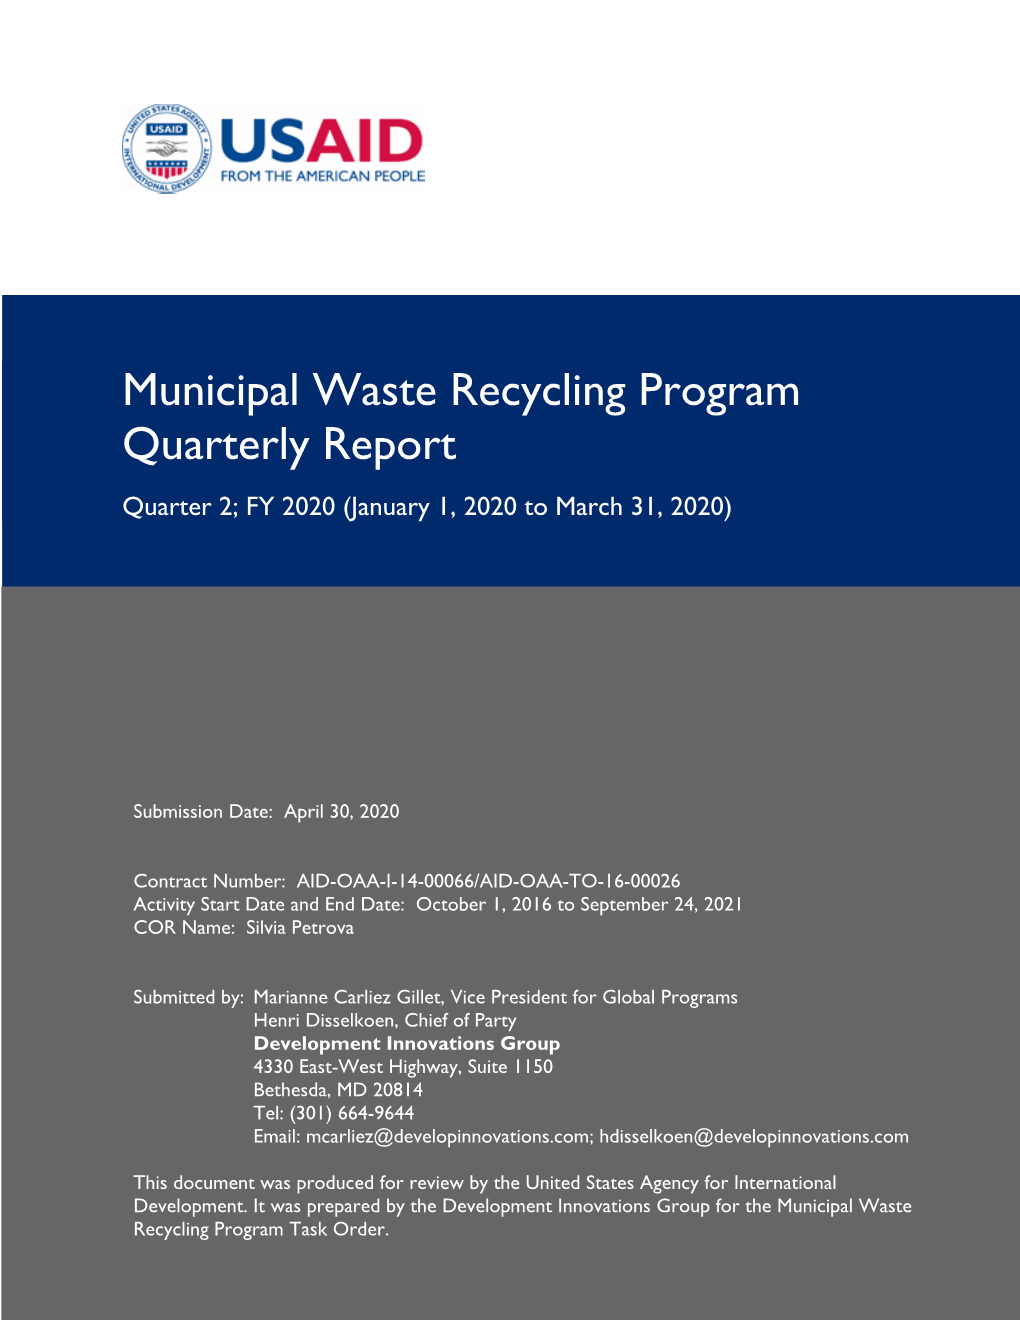 Municipal Waste Recycling Program Quarterly Report Quarter 2; FY 2020 (January 1, 2020 to March 31, 2020)